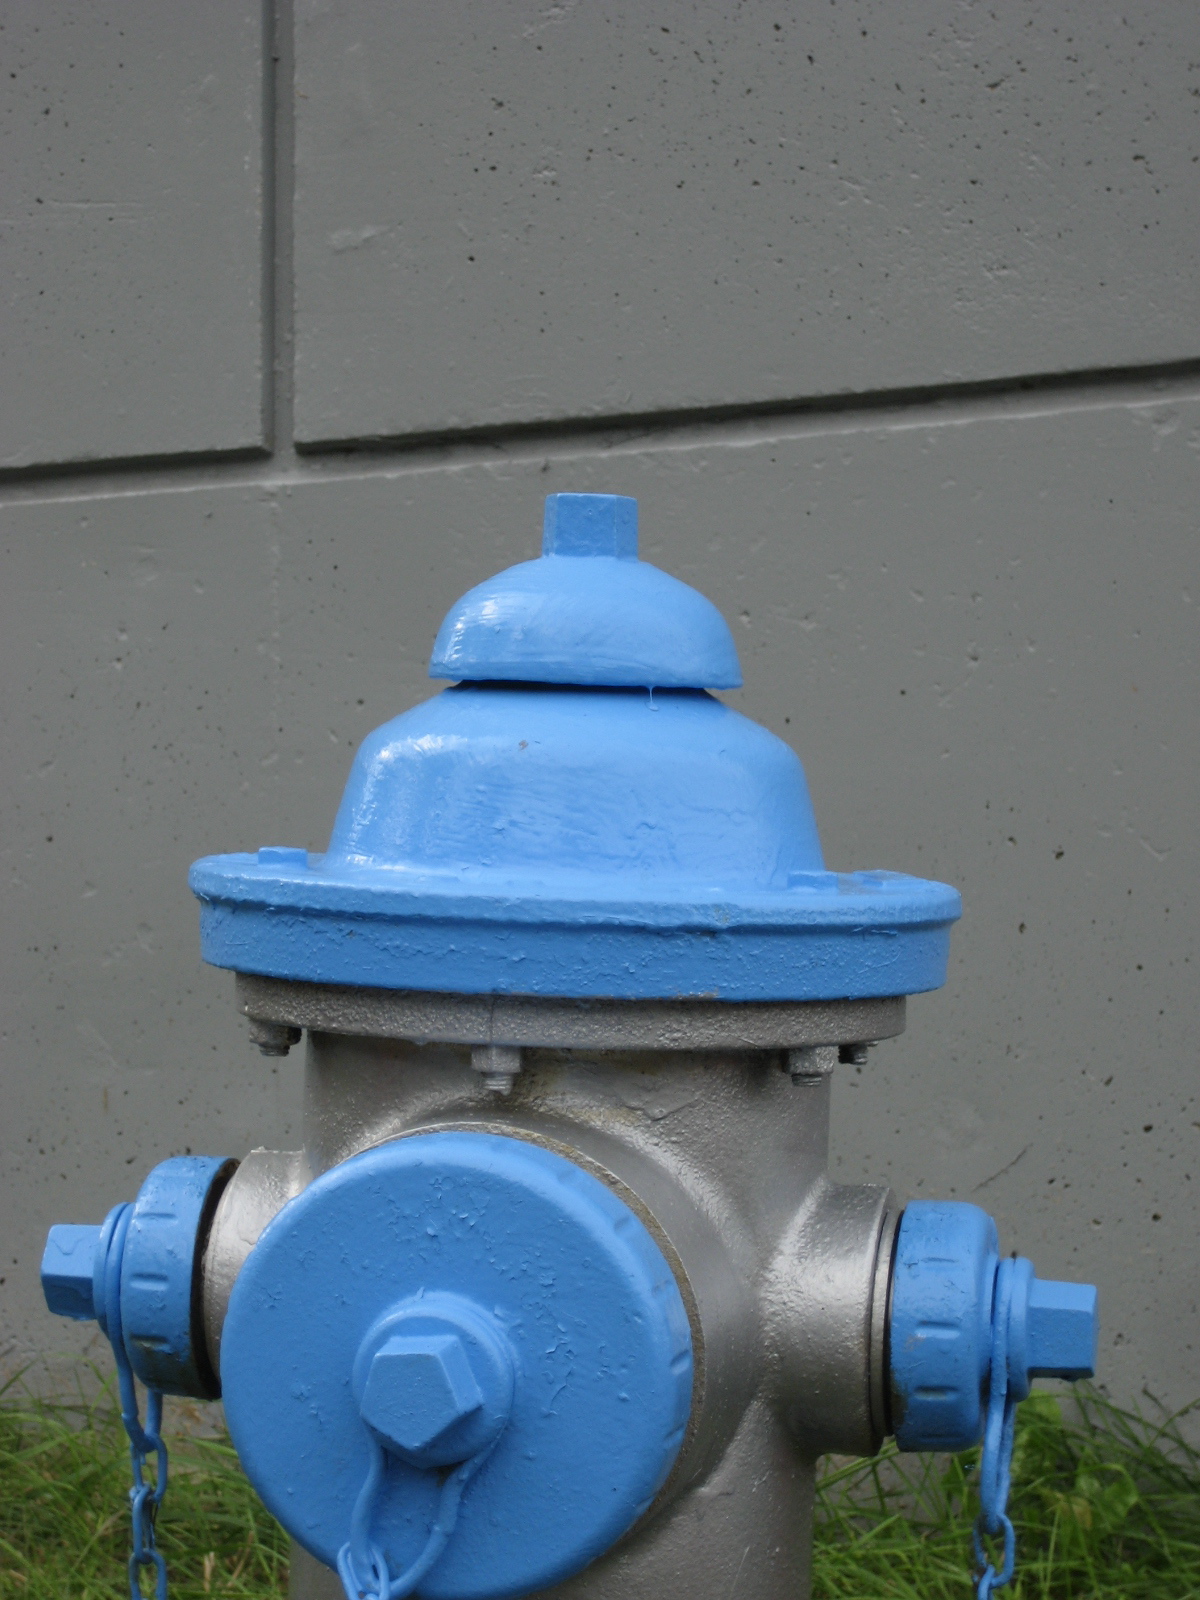 a fire hydrant painted blue and grey in the grass